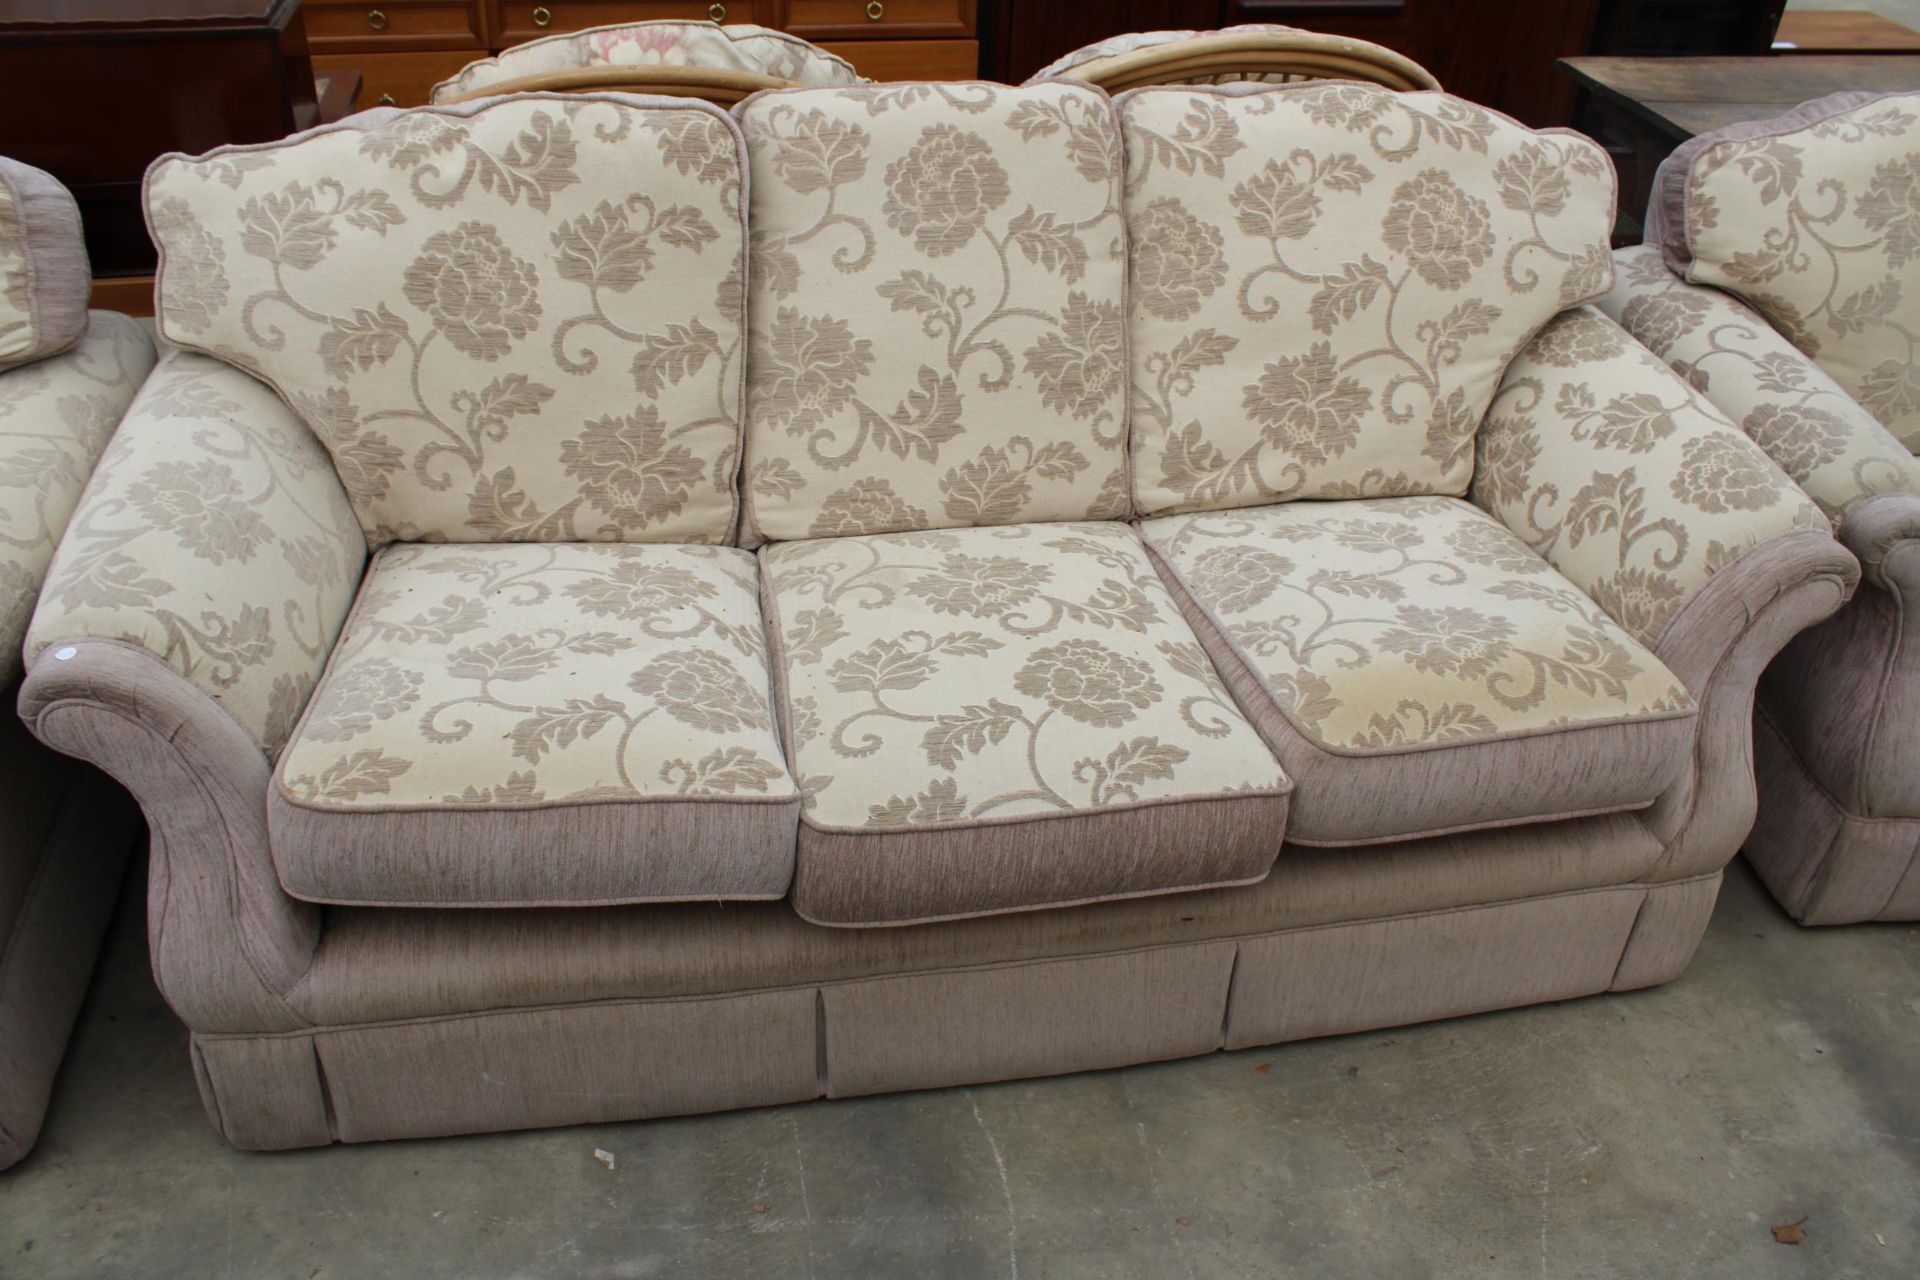 A MODERN FLORAL THREE PIECE SUITE WITH SIX LOOSE CUSHIONS - Image 3 of 6